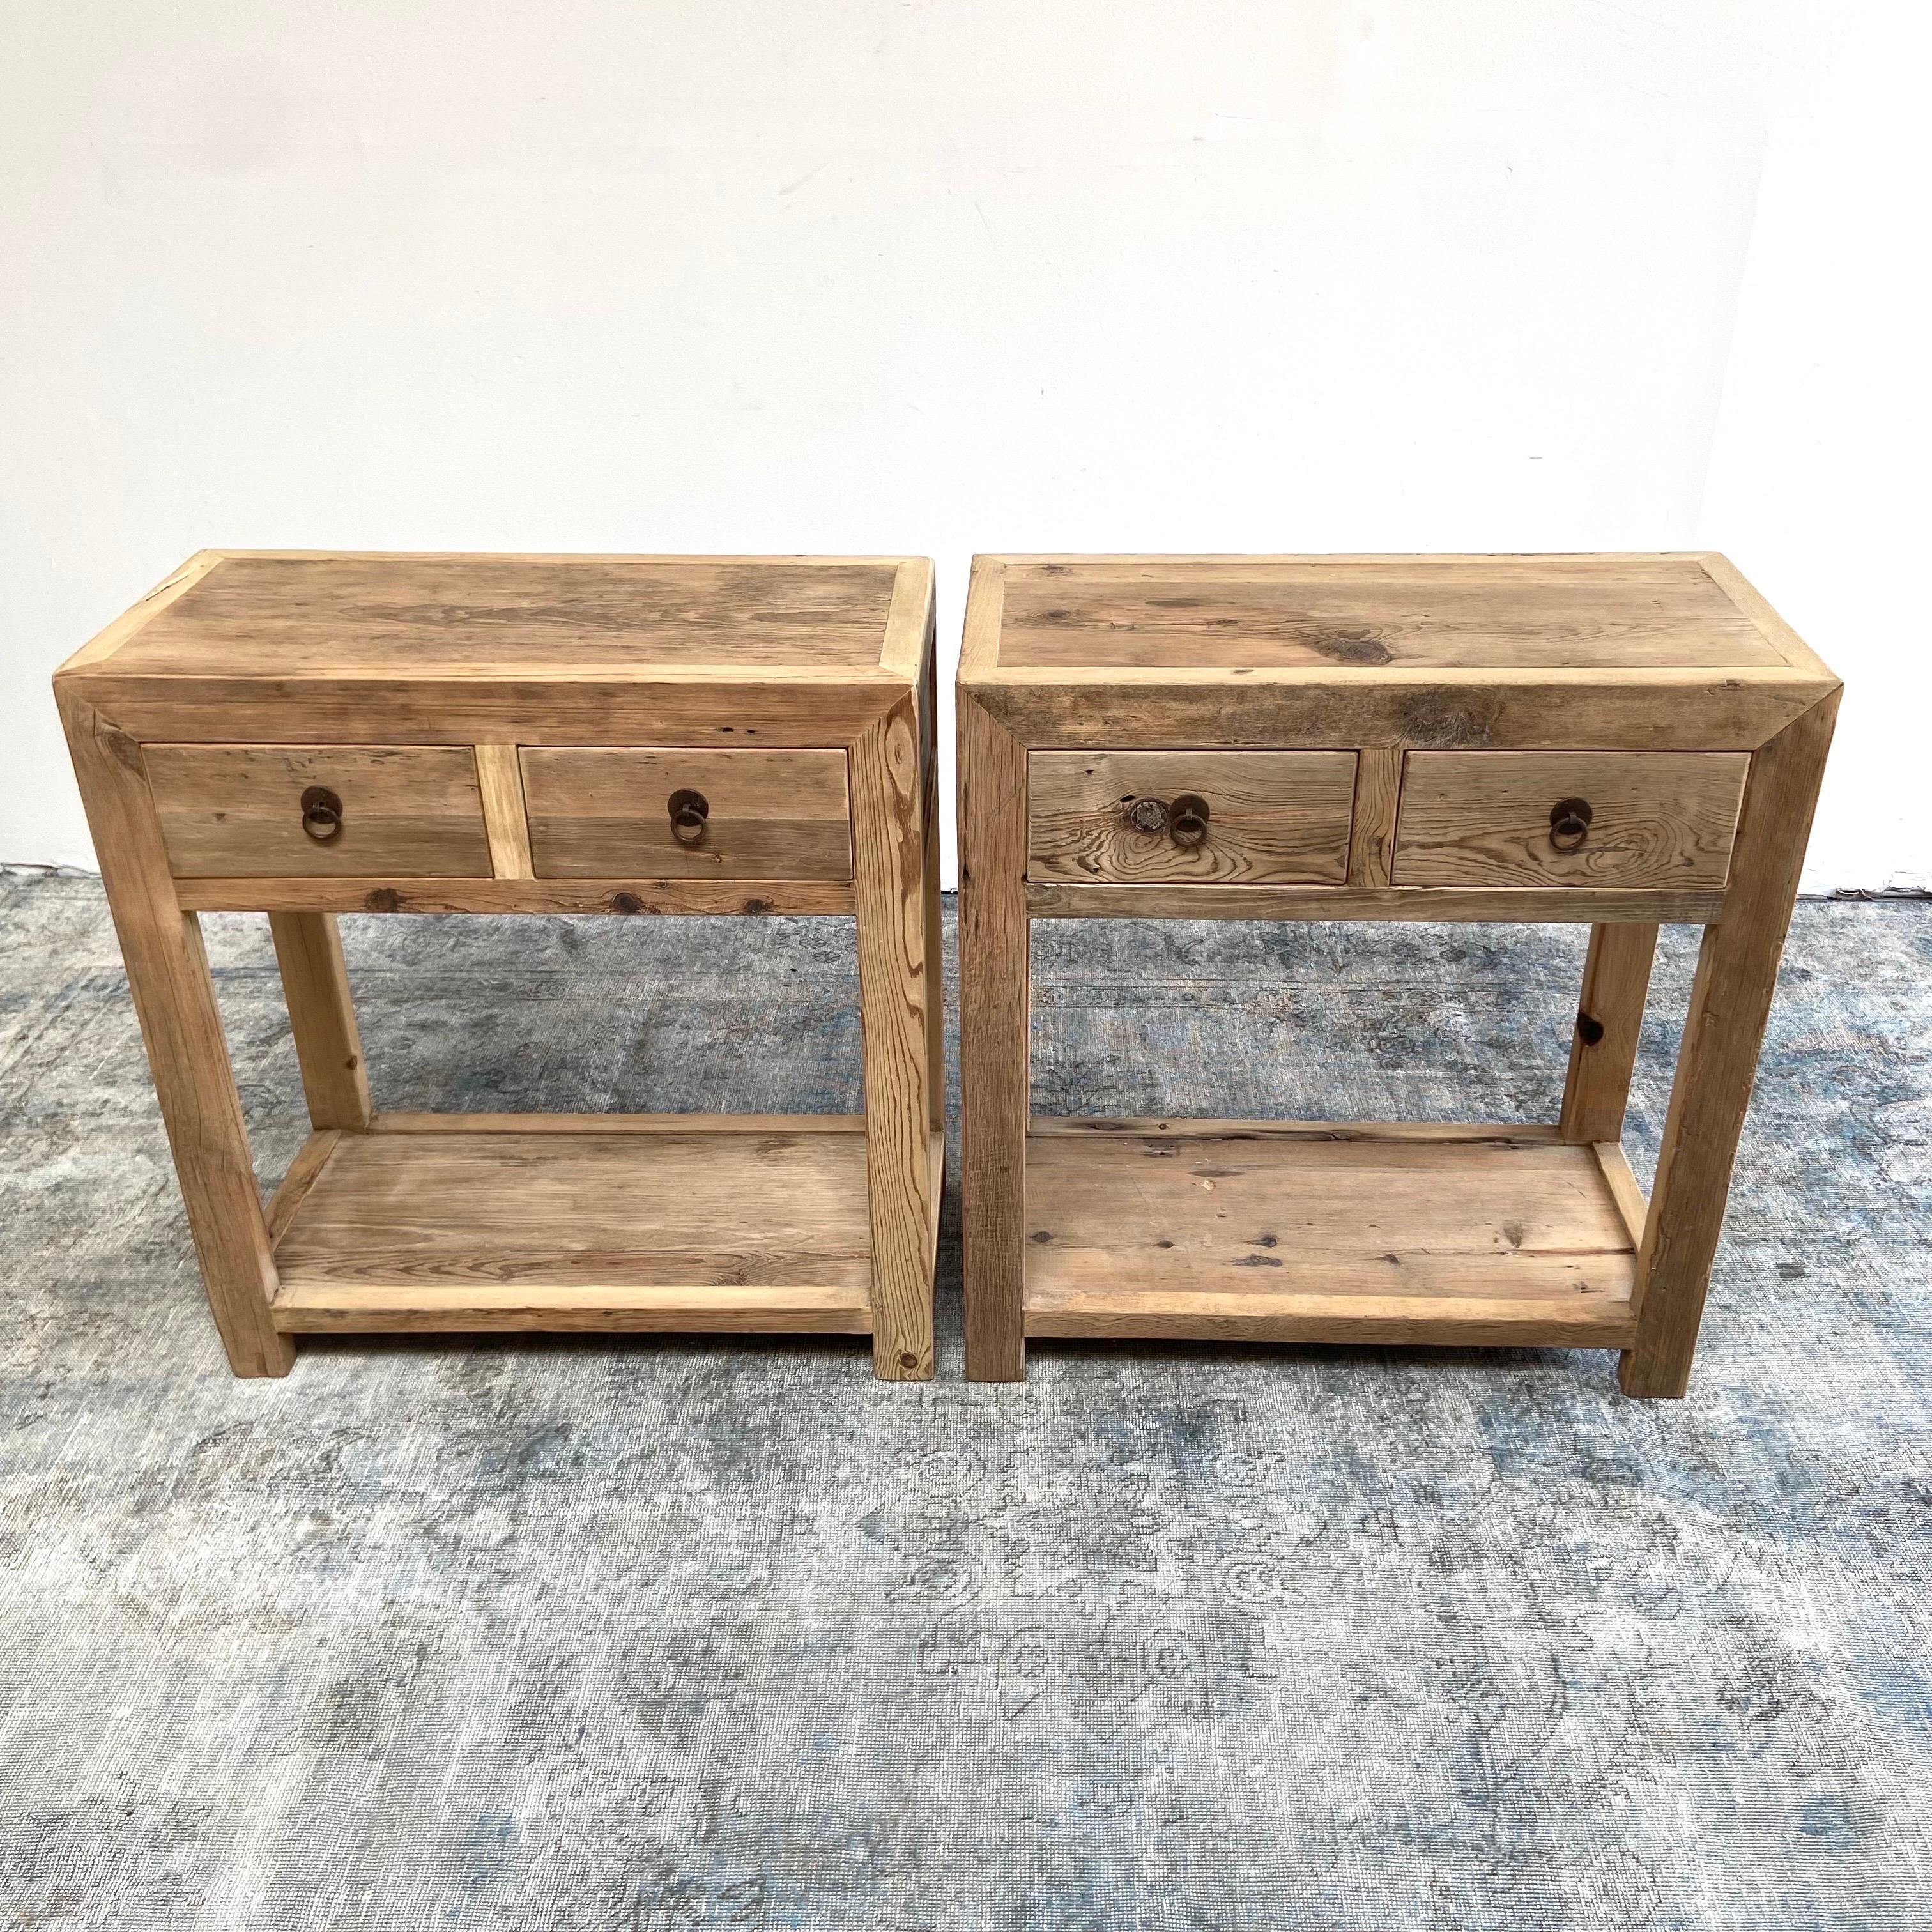 Custom elm wood 2 drawer console table with drawers. Natural distressed patina.
Price is for each console.
Measures: 33” W x 18” D x 35” H
Solid / Sturdy, great for everyday use in an entry, living room or dining room.